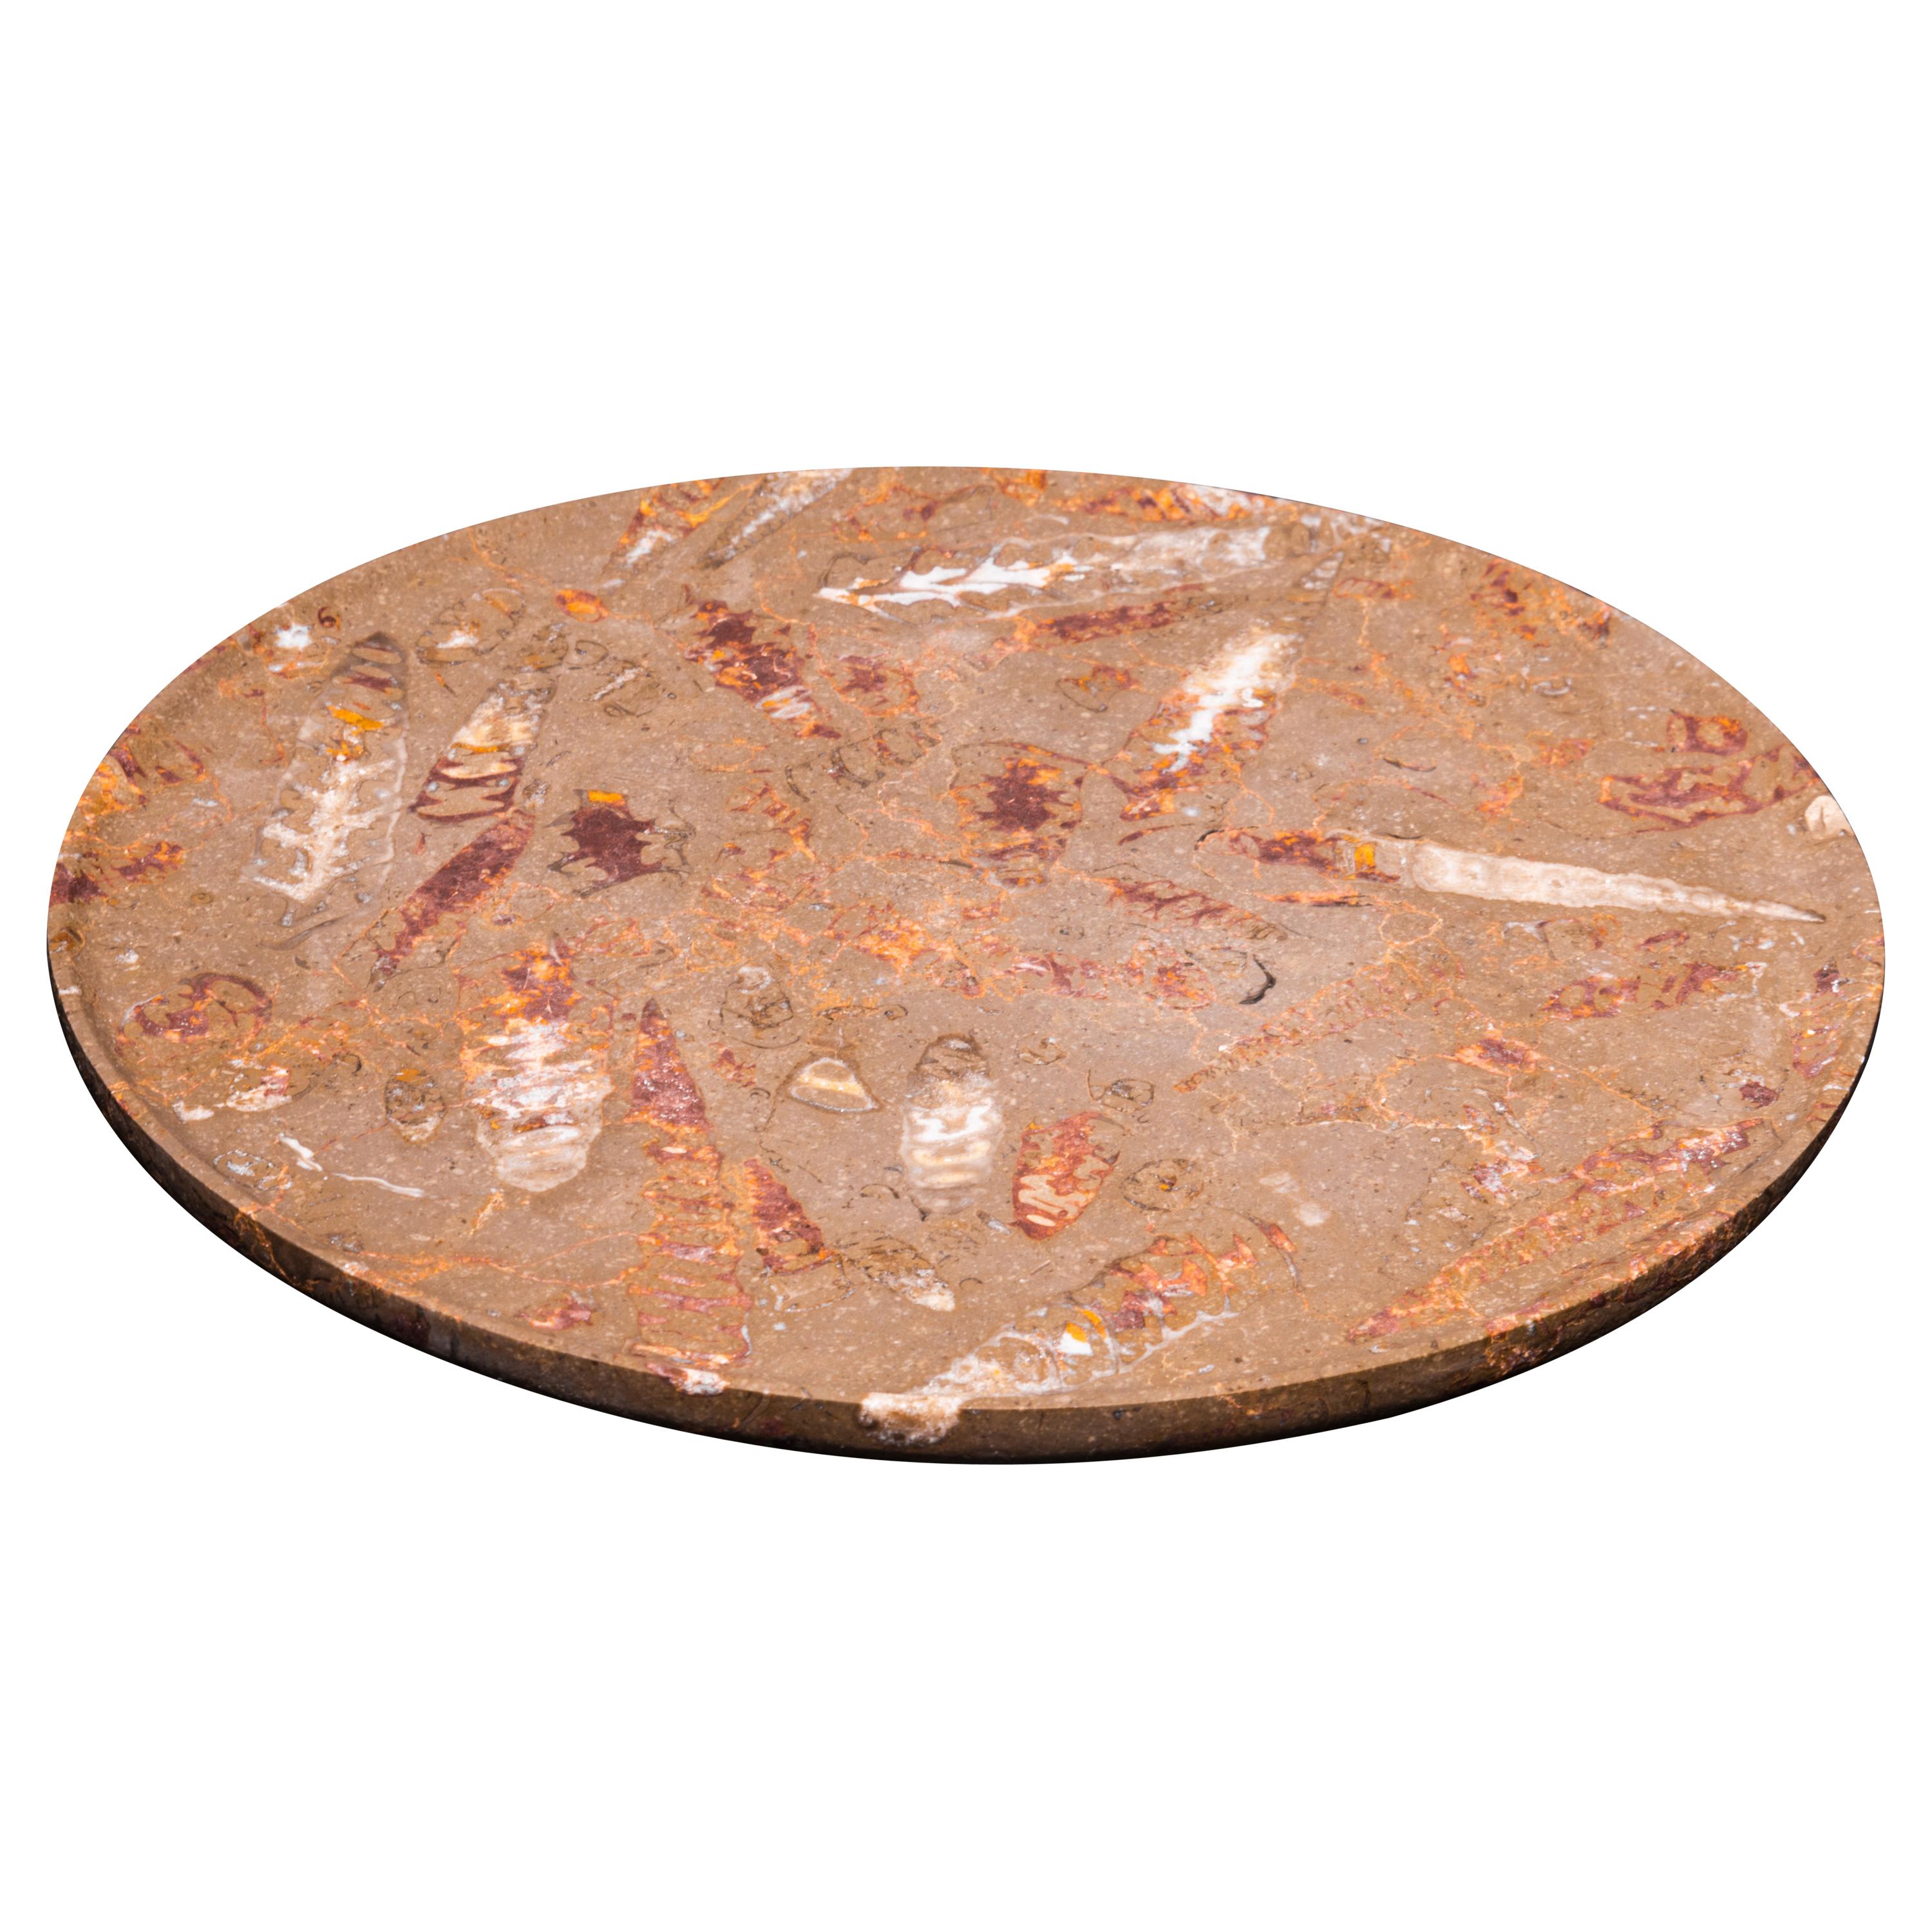 Aina Contemporary Jurassic Fossil Marble Mare Plate, Living Collection For Sale